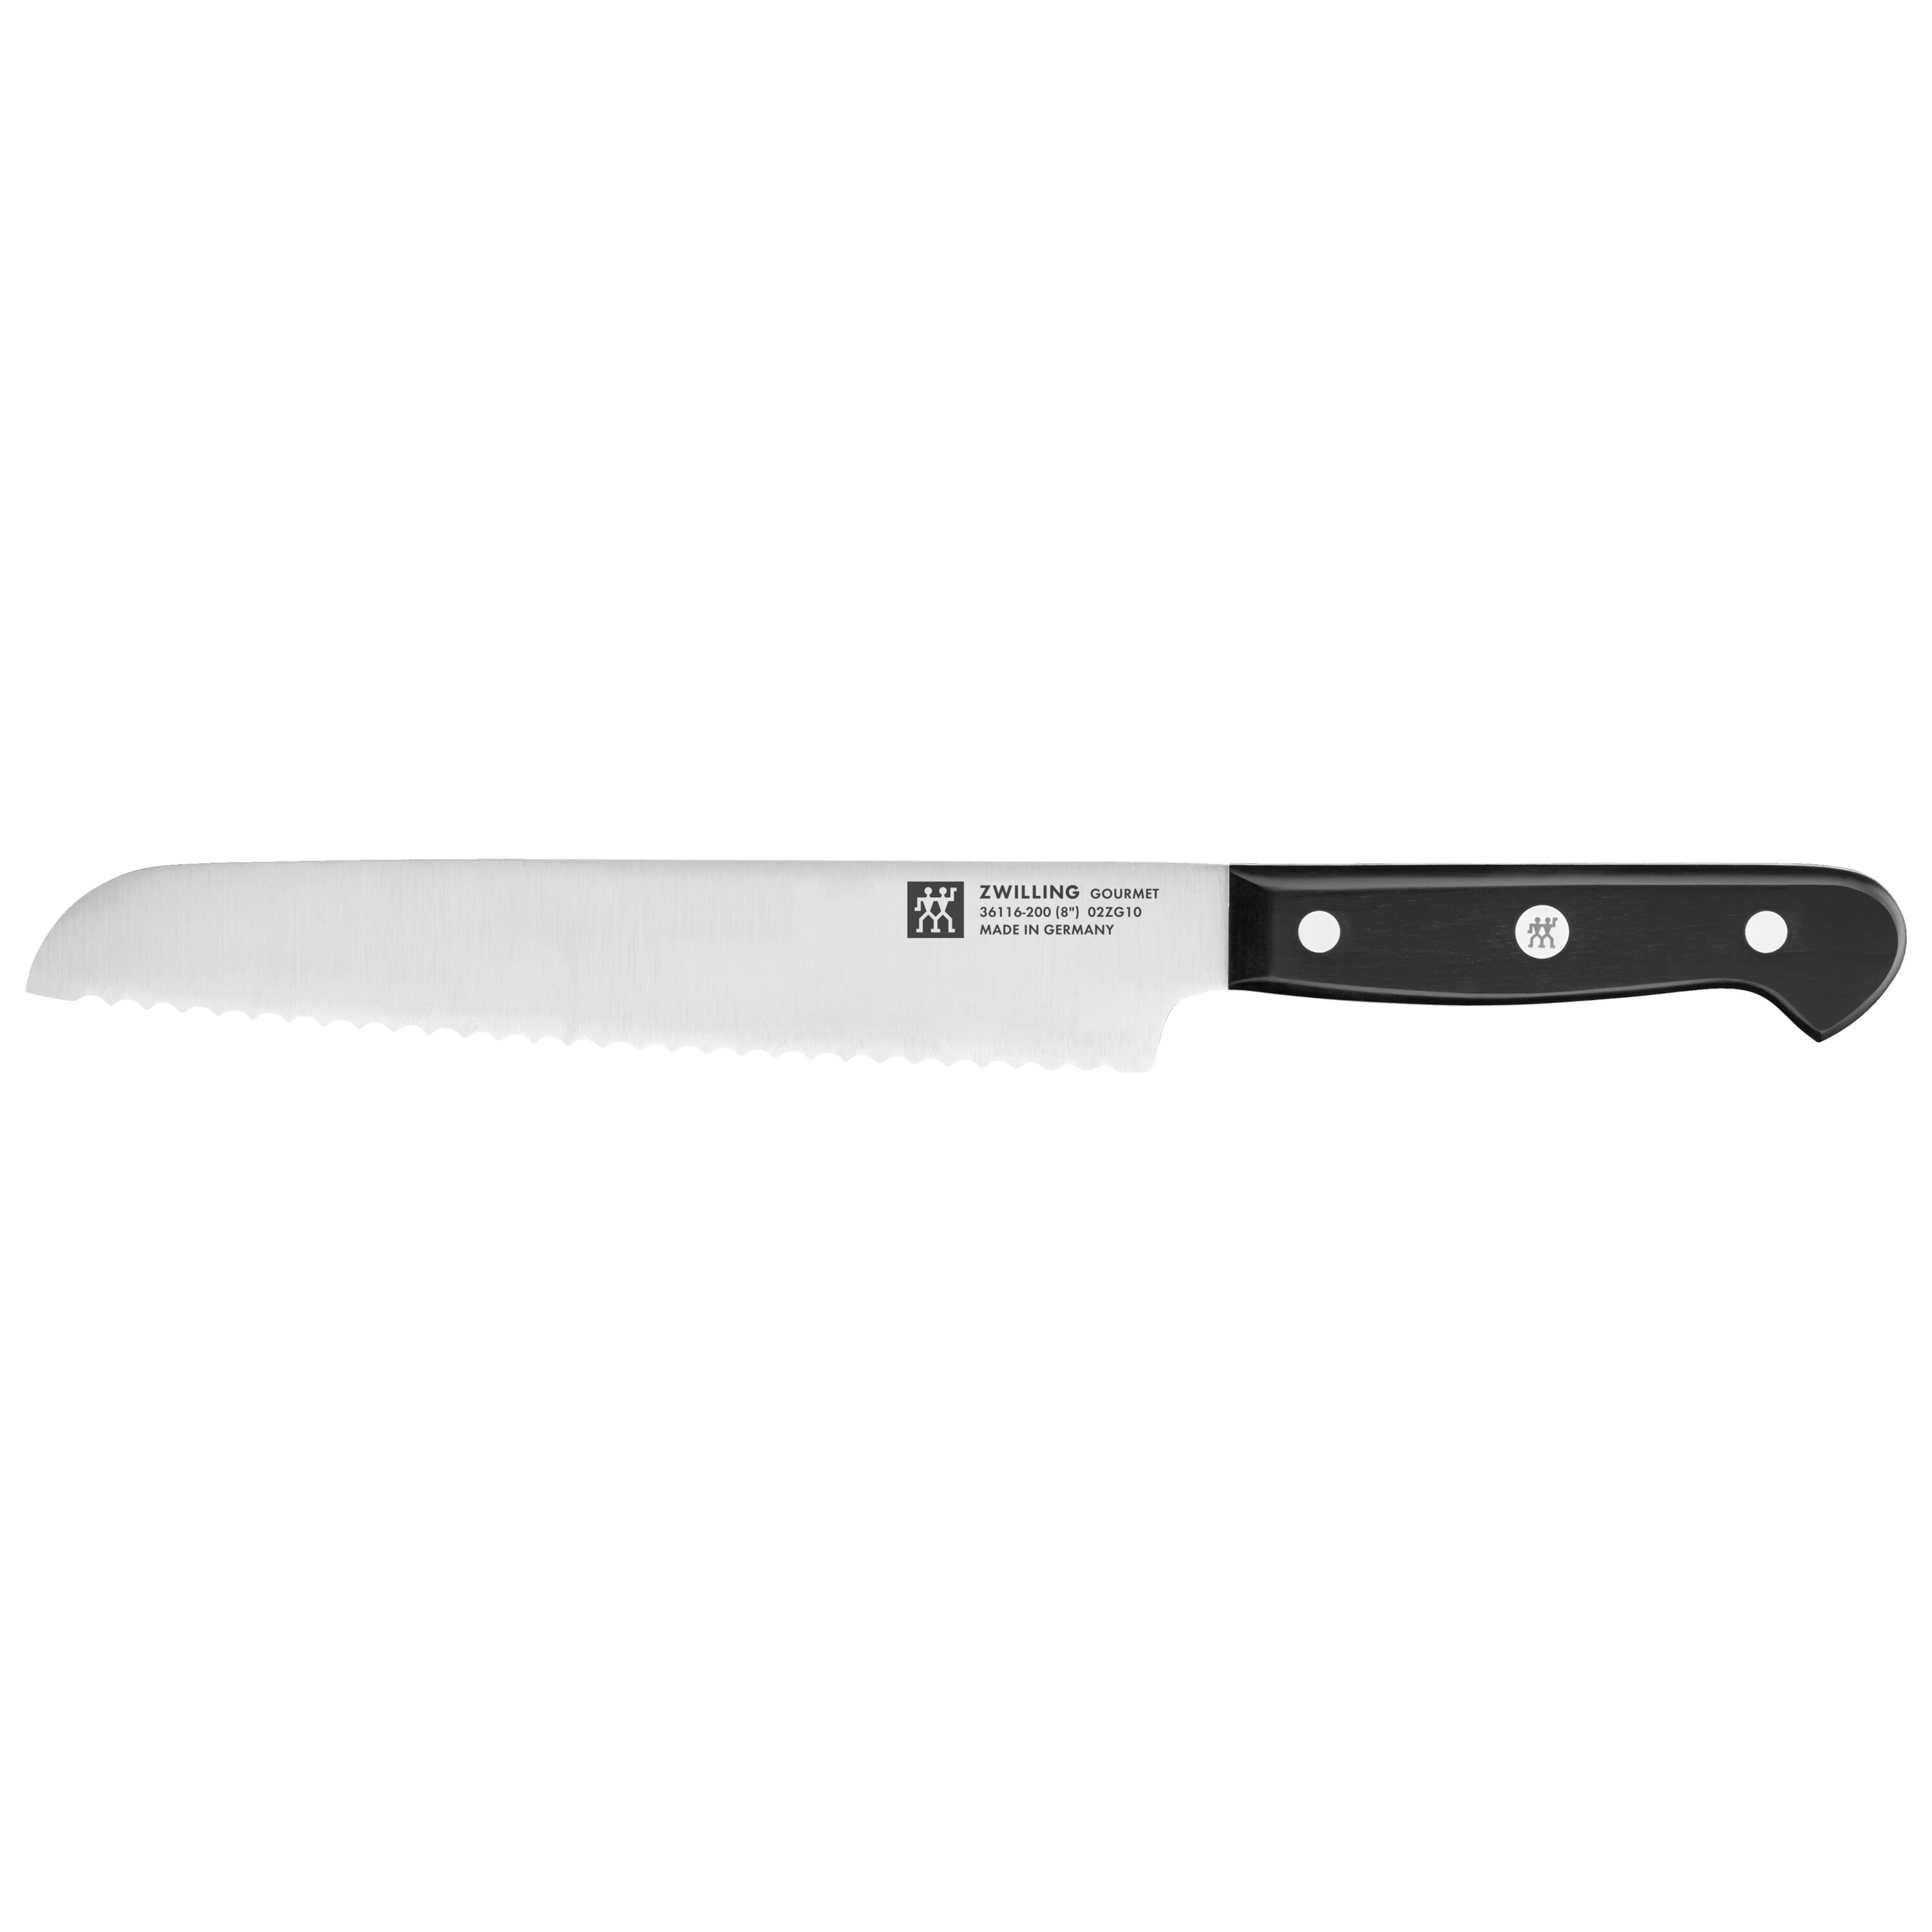 ZWILLING Gourmet 10-inch Bread / Pastry Knife, 10-inch - Kroger